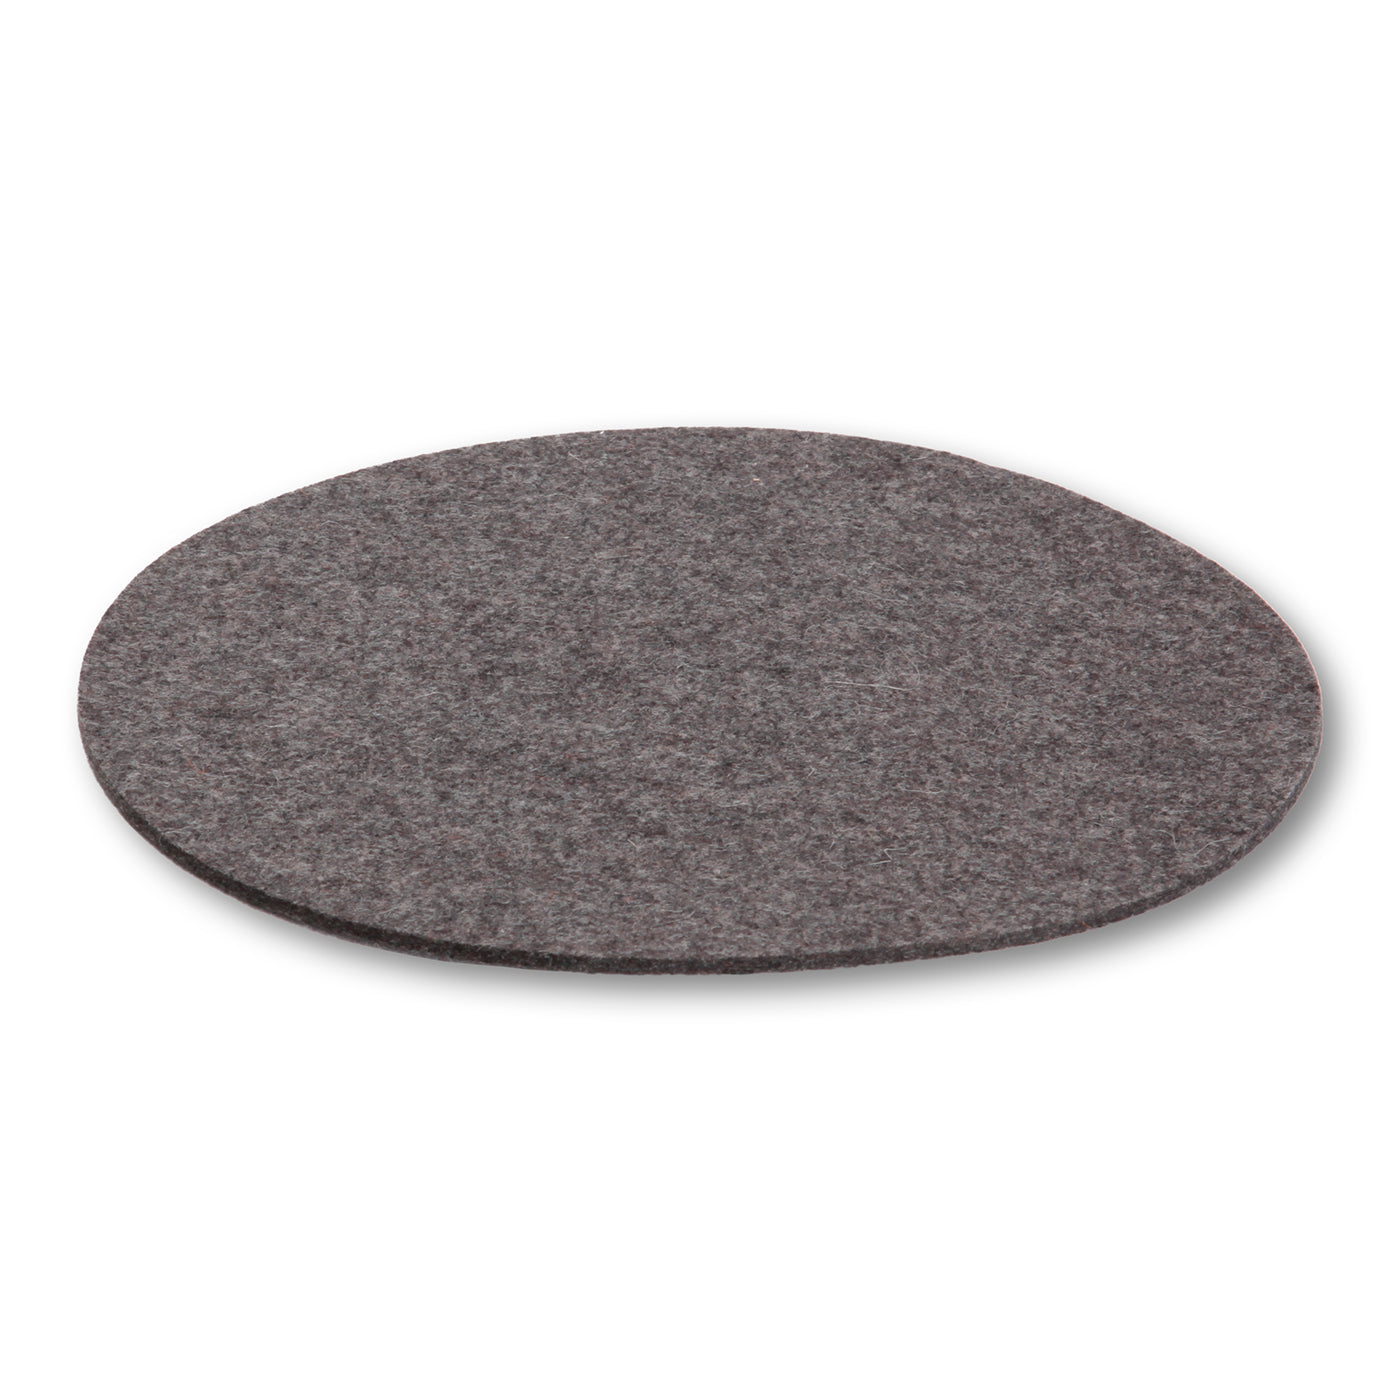 Round coasters for plates, vases &amp; more made from 100% wool felt